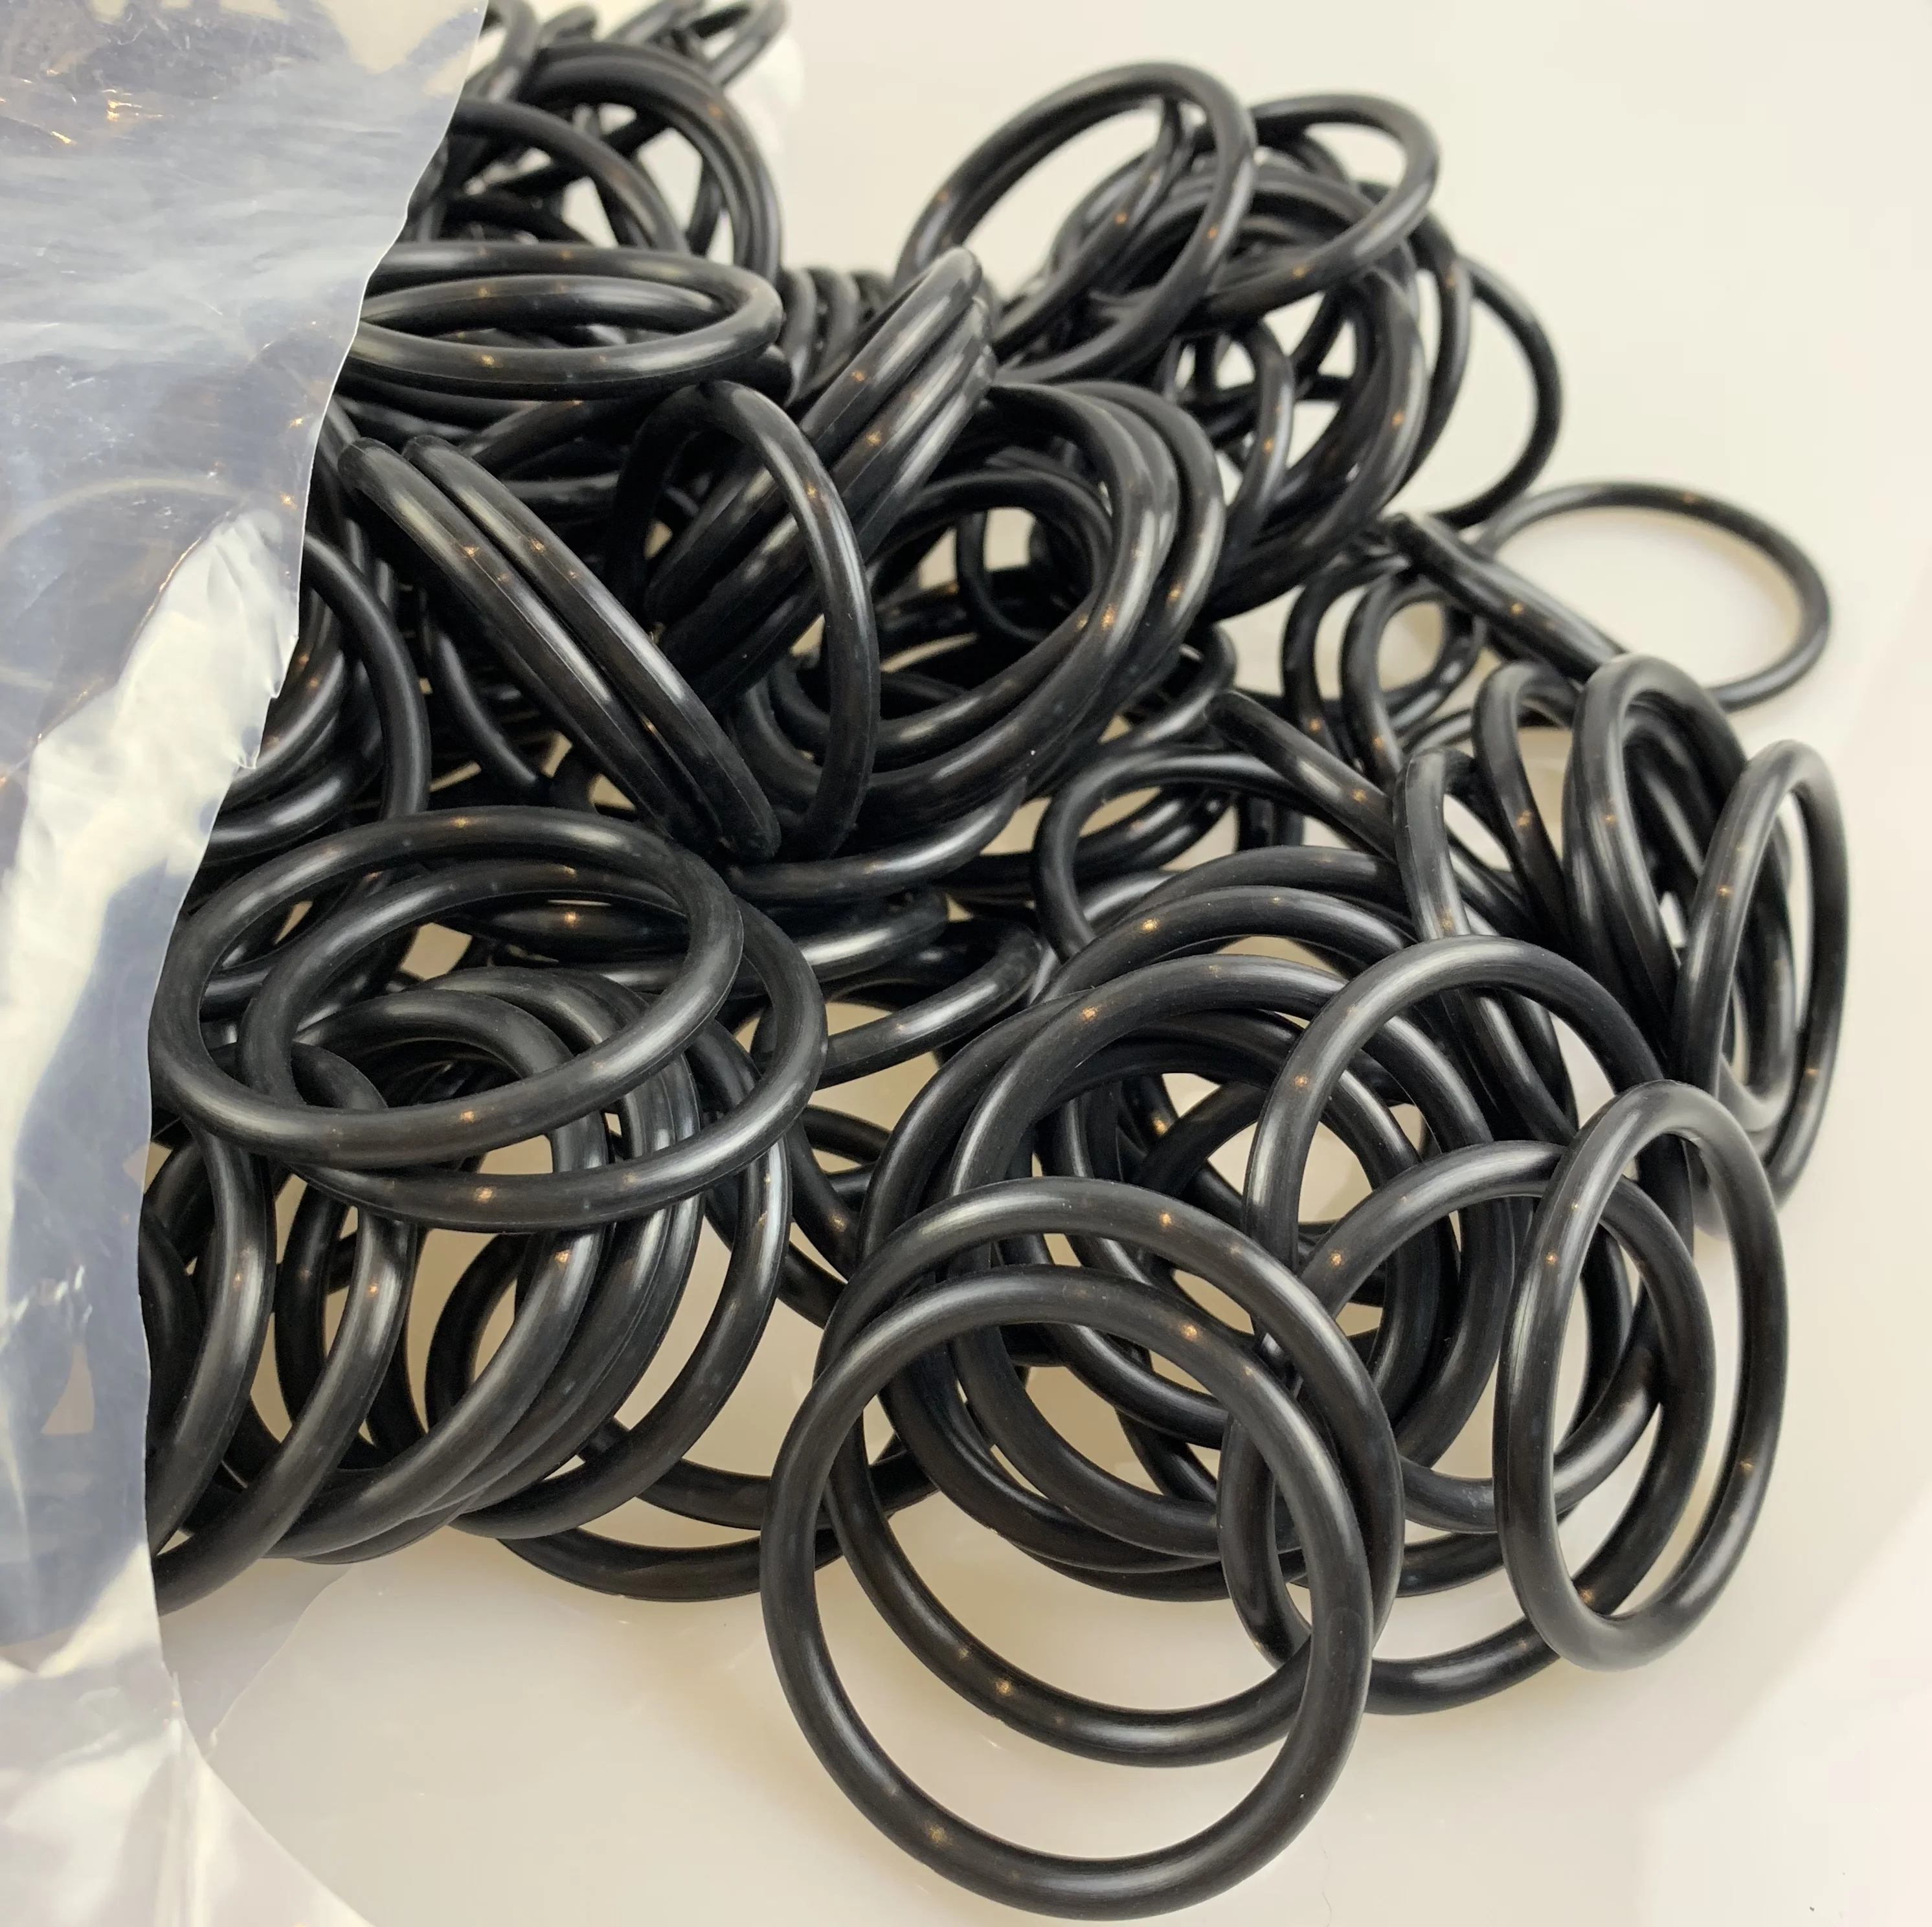 
new products free samples rubber o rings rubber_o_rings free samples rubber o rings 